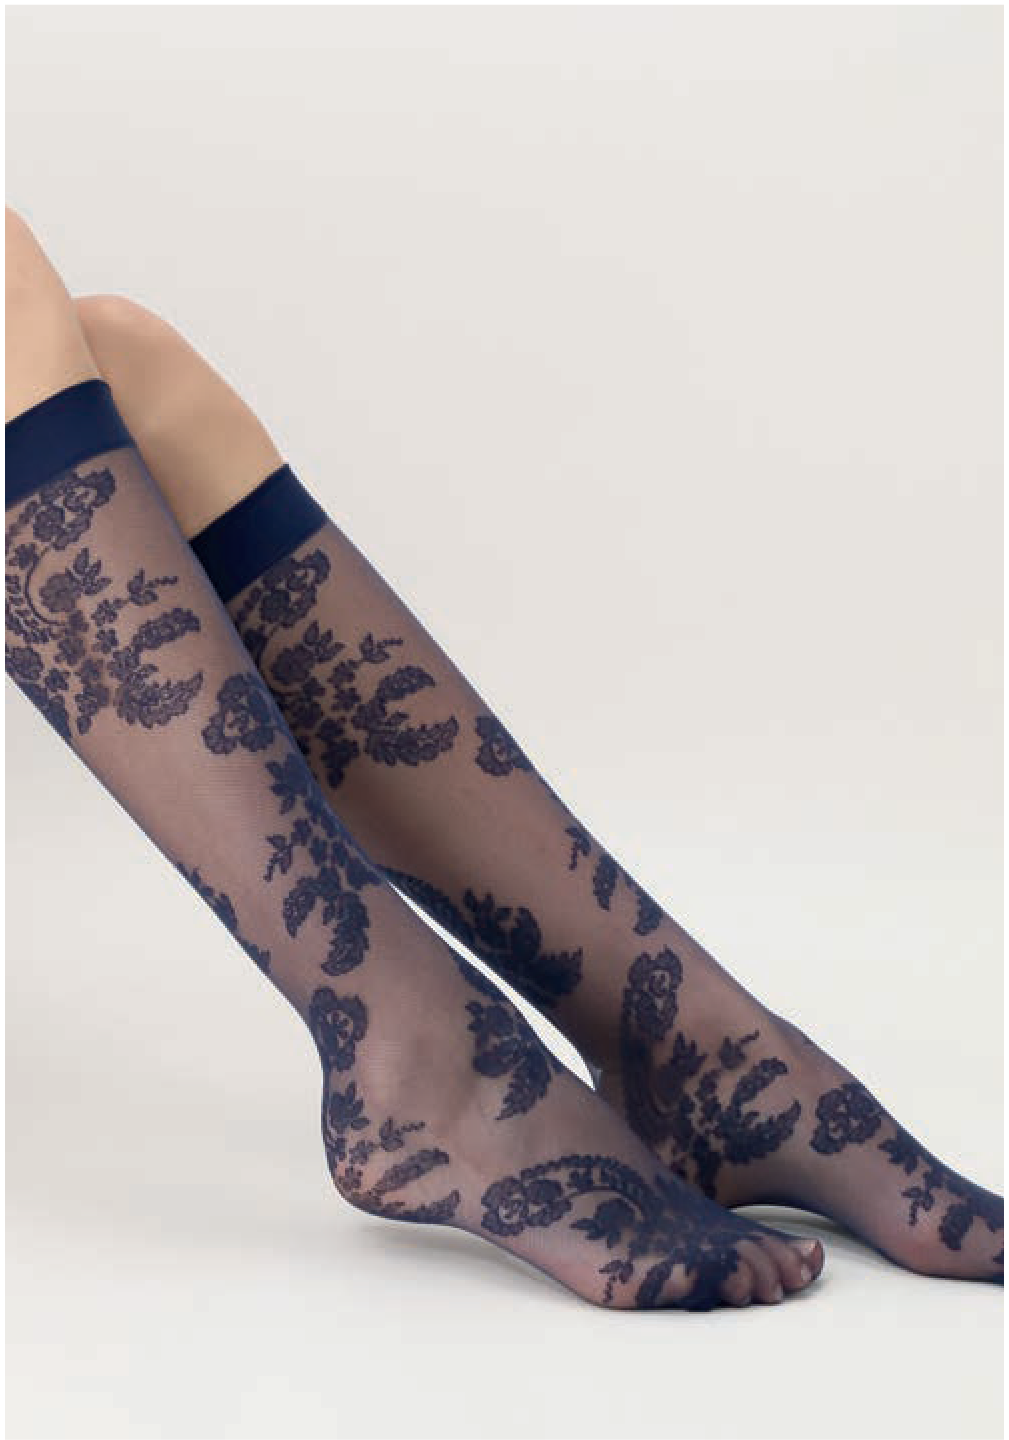 Oroblù Paisley Gambaletto - Sheer fashion knee-high socks with a paisley lace style pattern and deep comfort cuff. Available in black, navy and white.